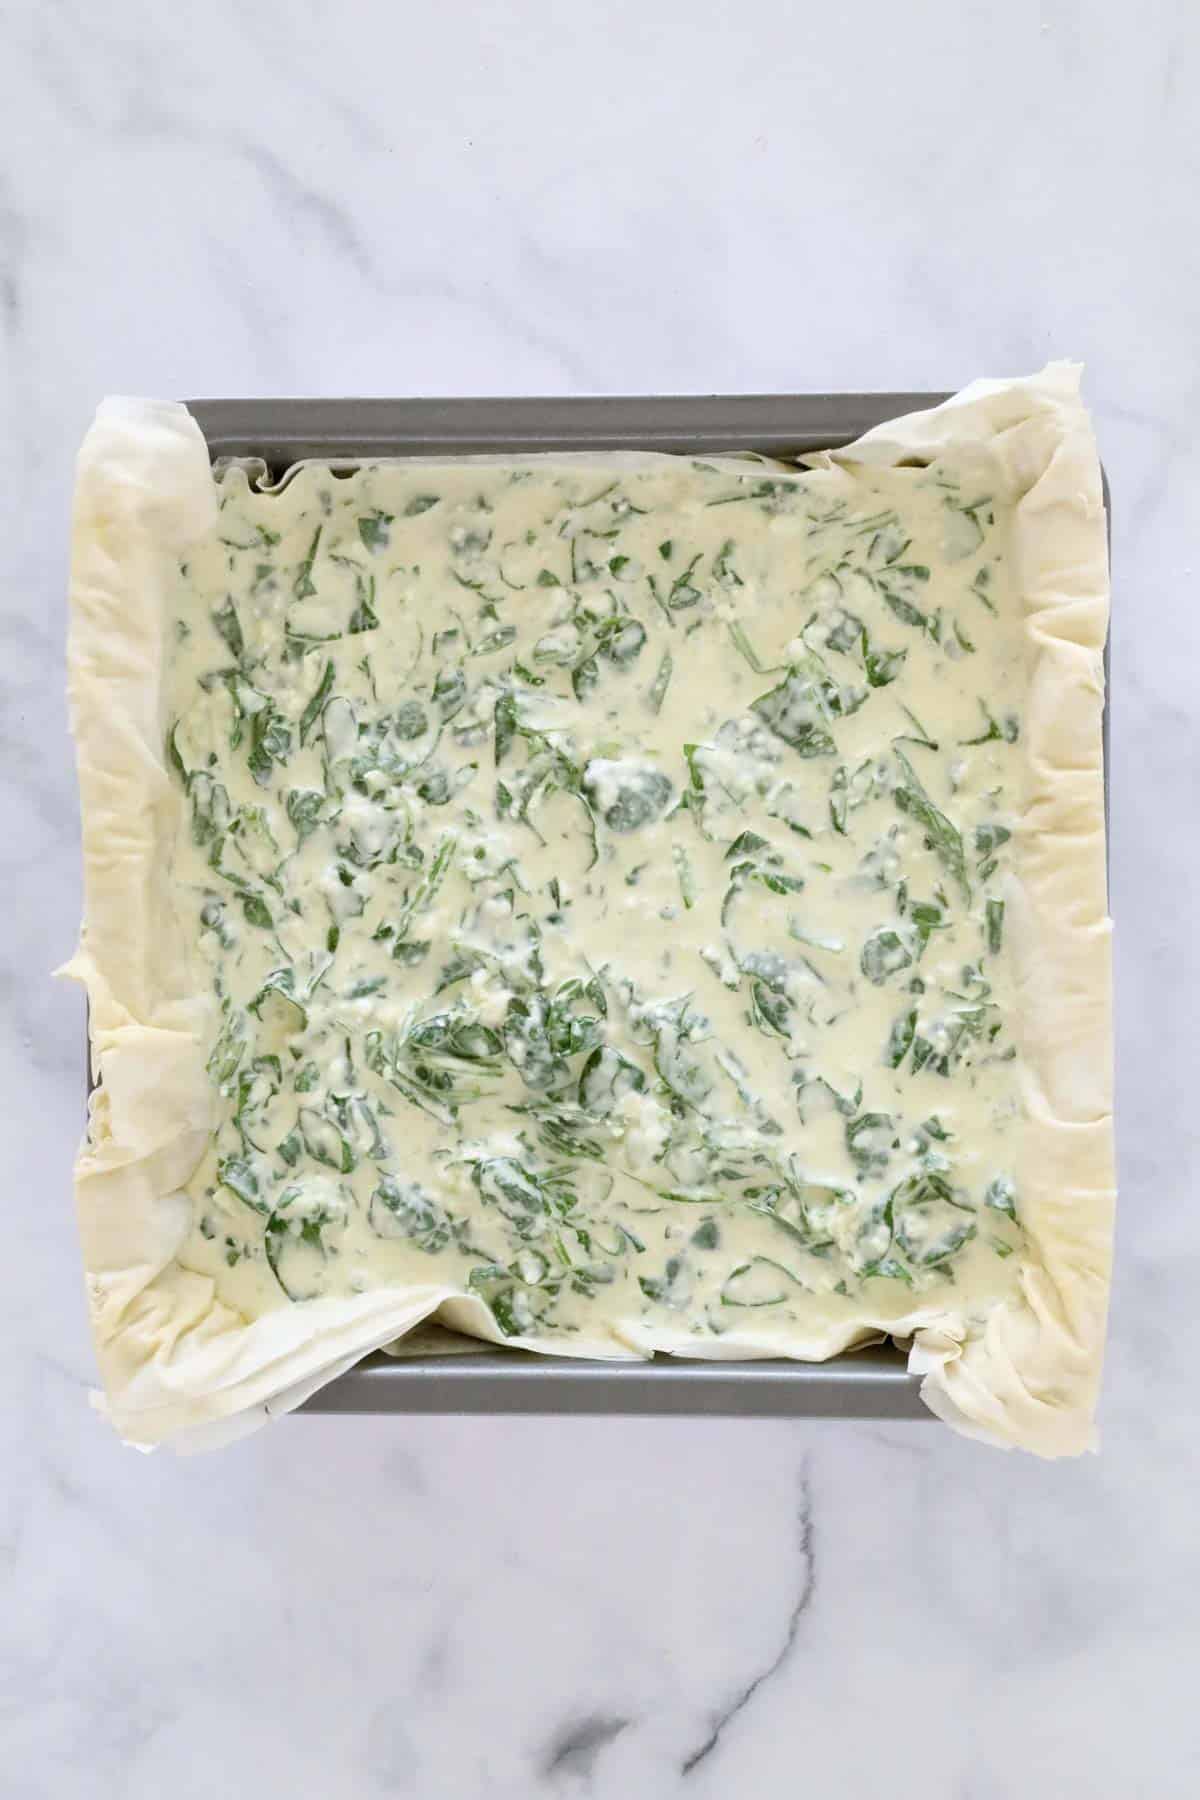 Spinach and cheese filo pie.